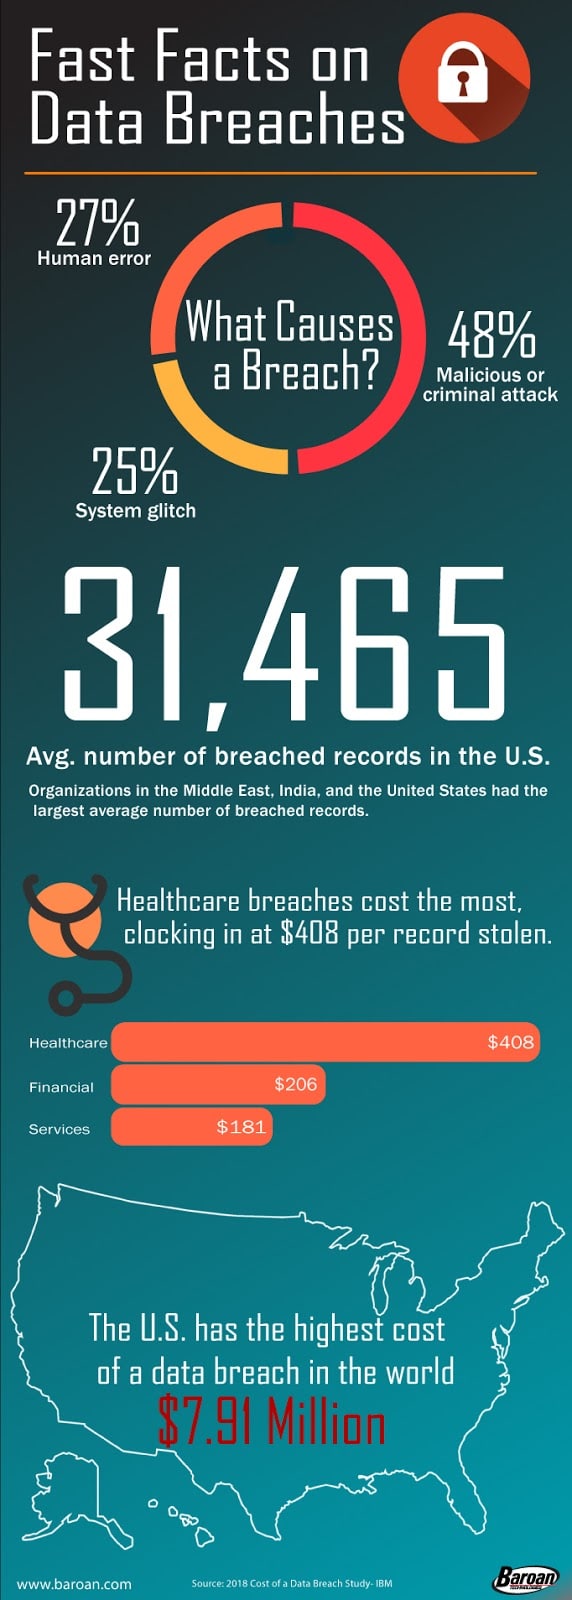 4 Key Facts About Data Breaches